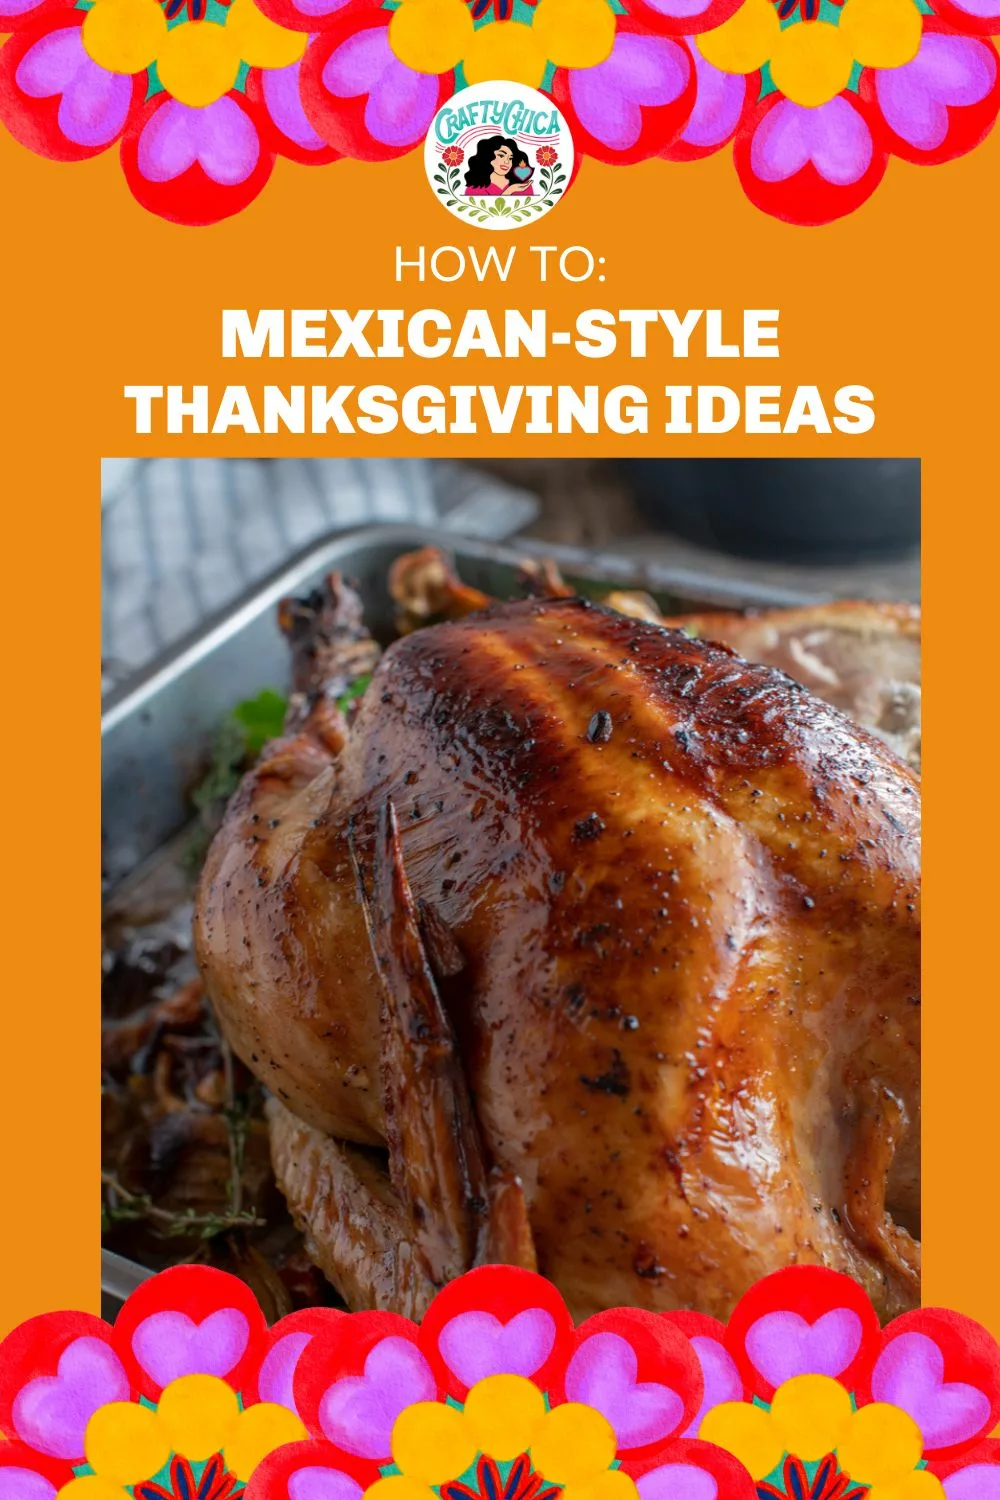 roasted turkey for Mexican-inspired Thanksgiving ideas